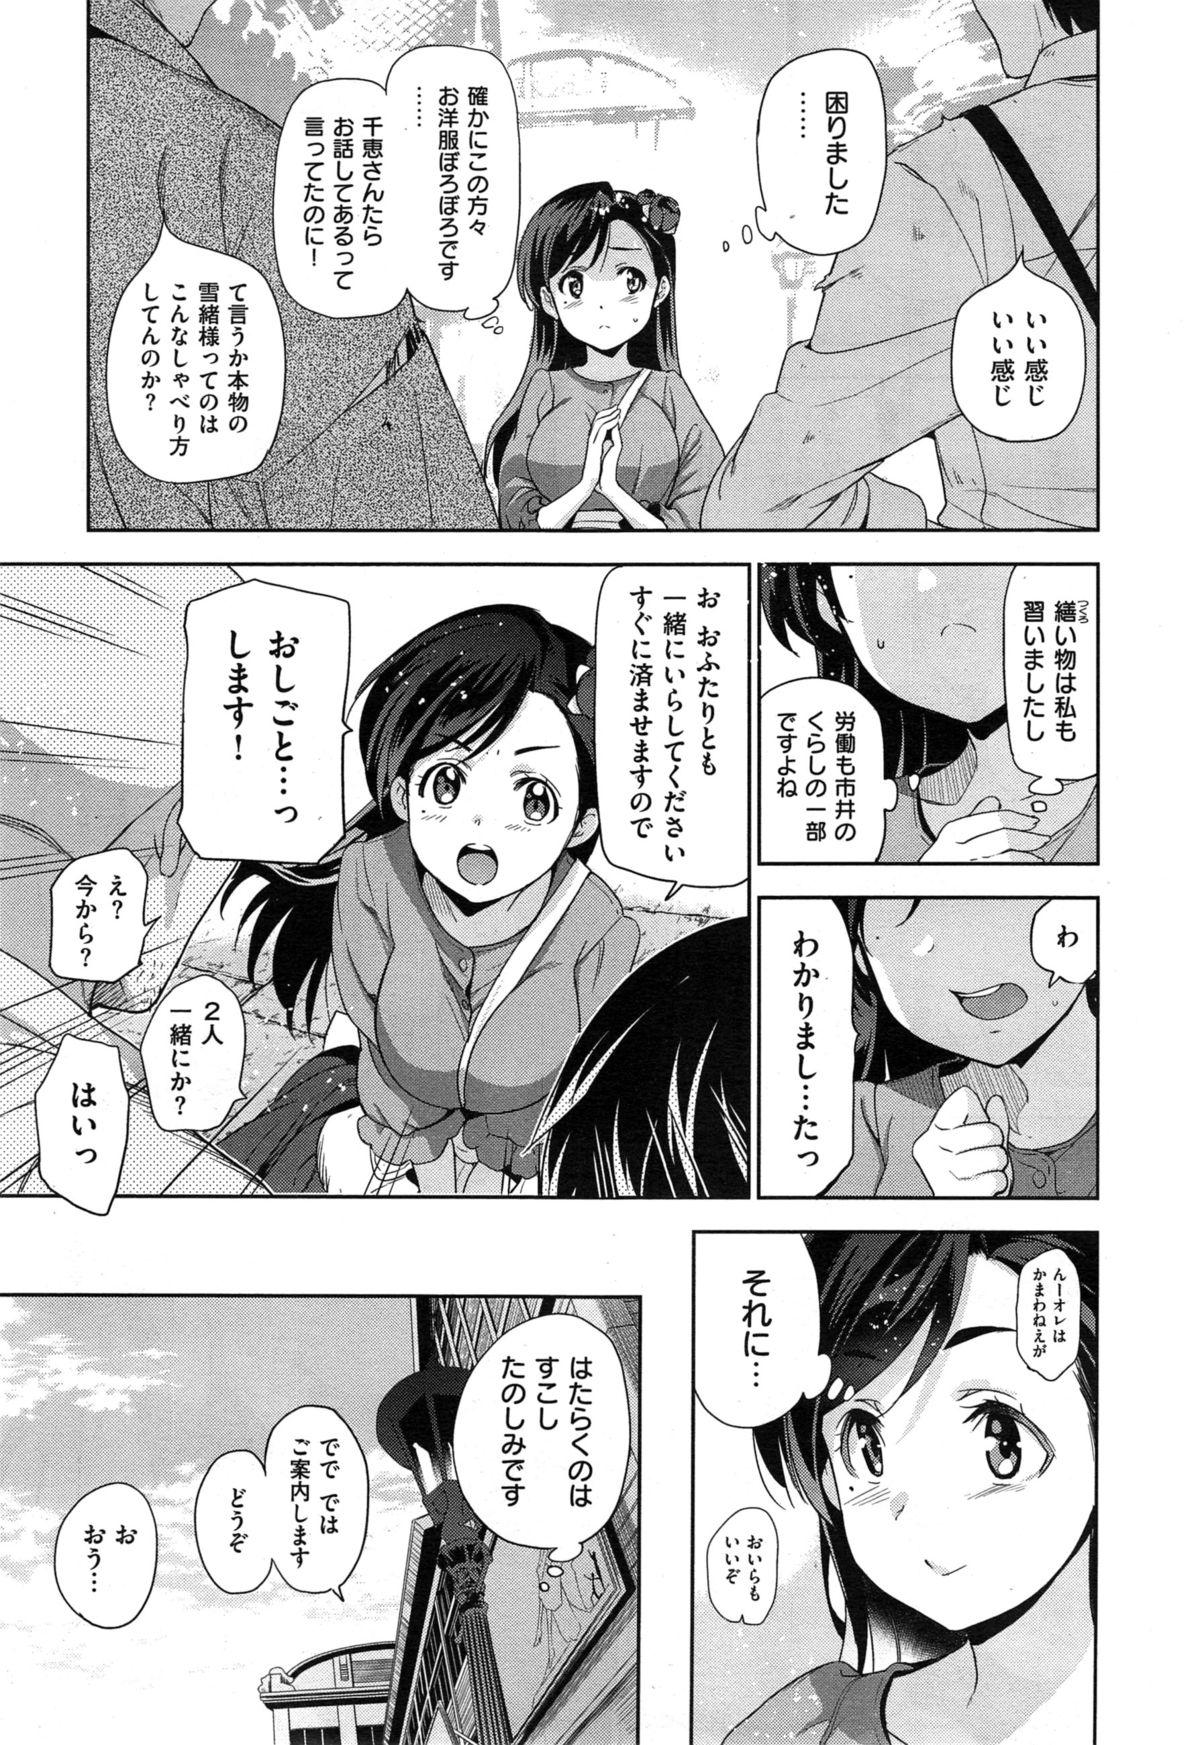 Sesso Diamond and Zirconia Ch. 1-2 Stripping - Page 7